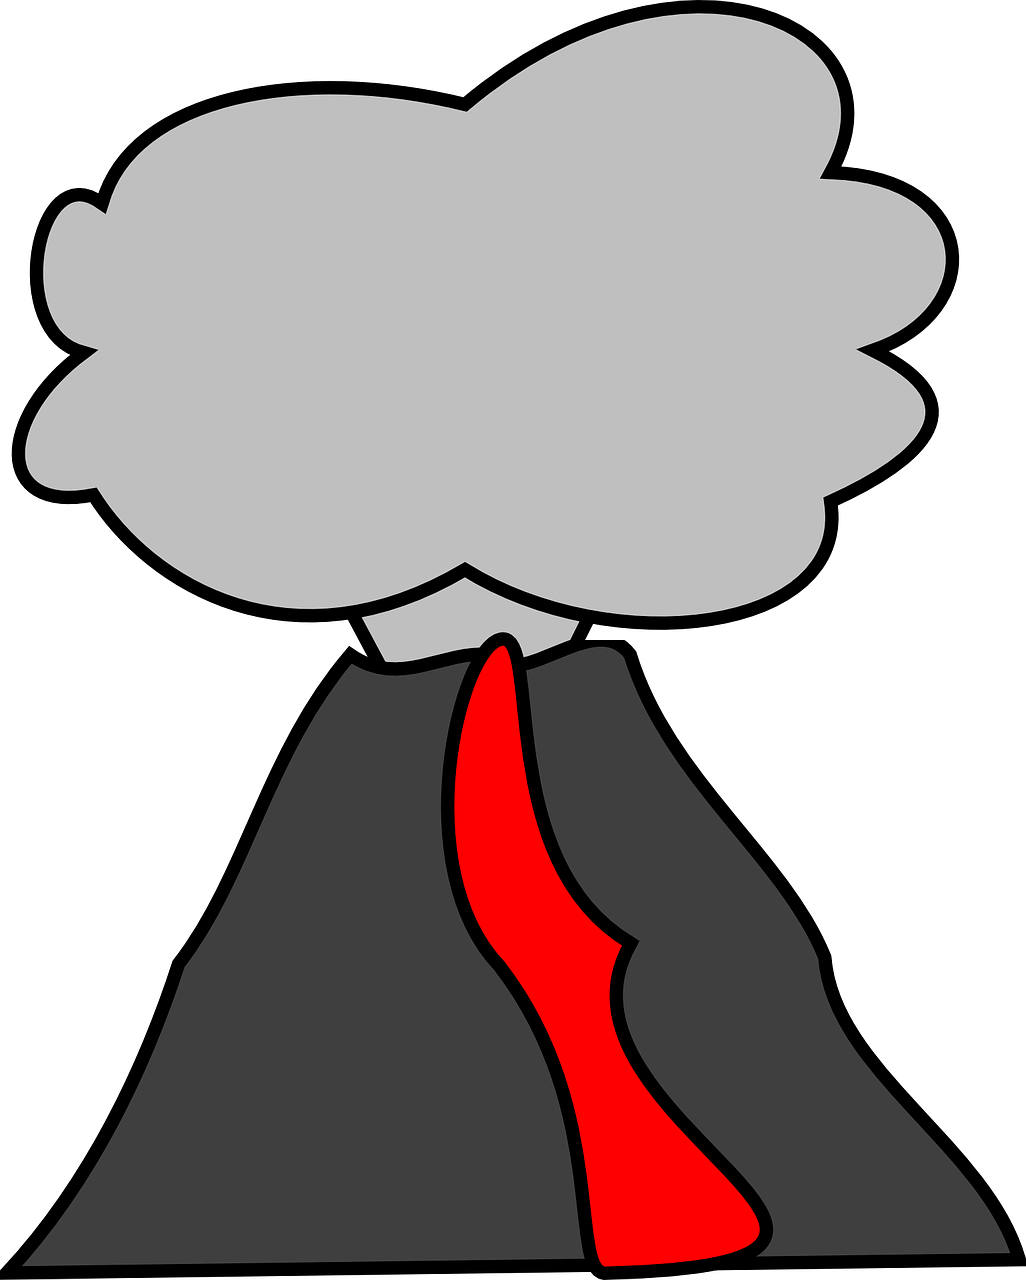 Clipart explosion volcano. How to make a